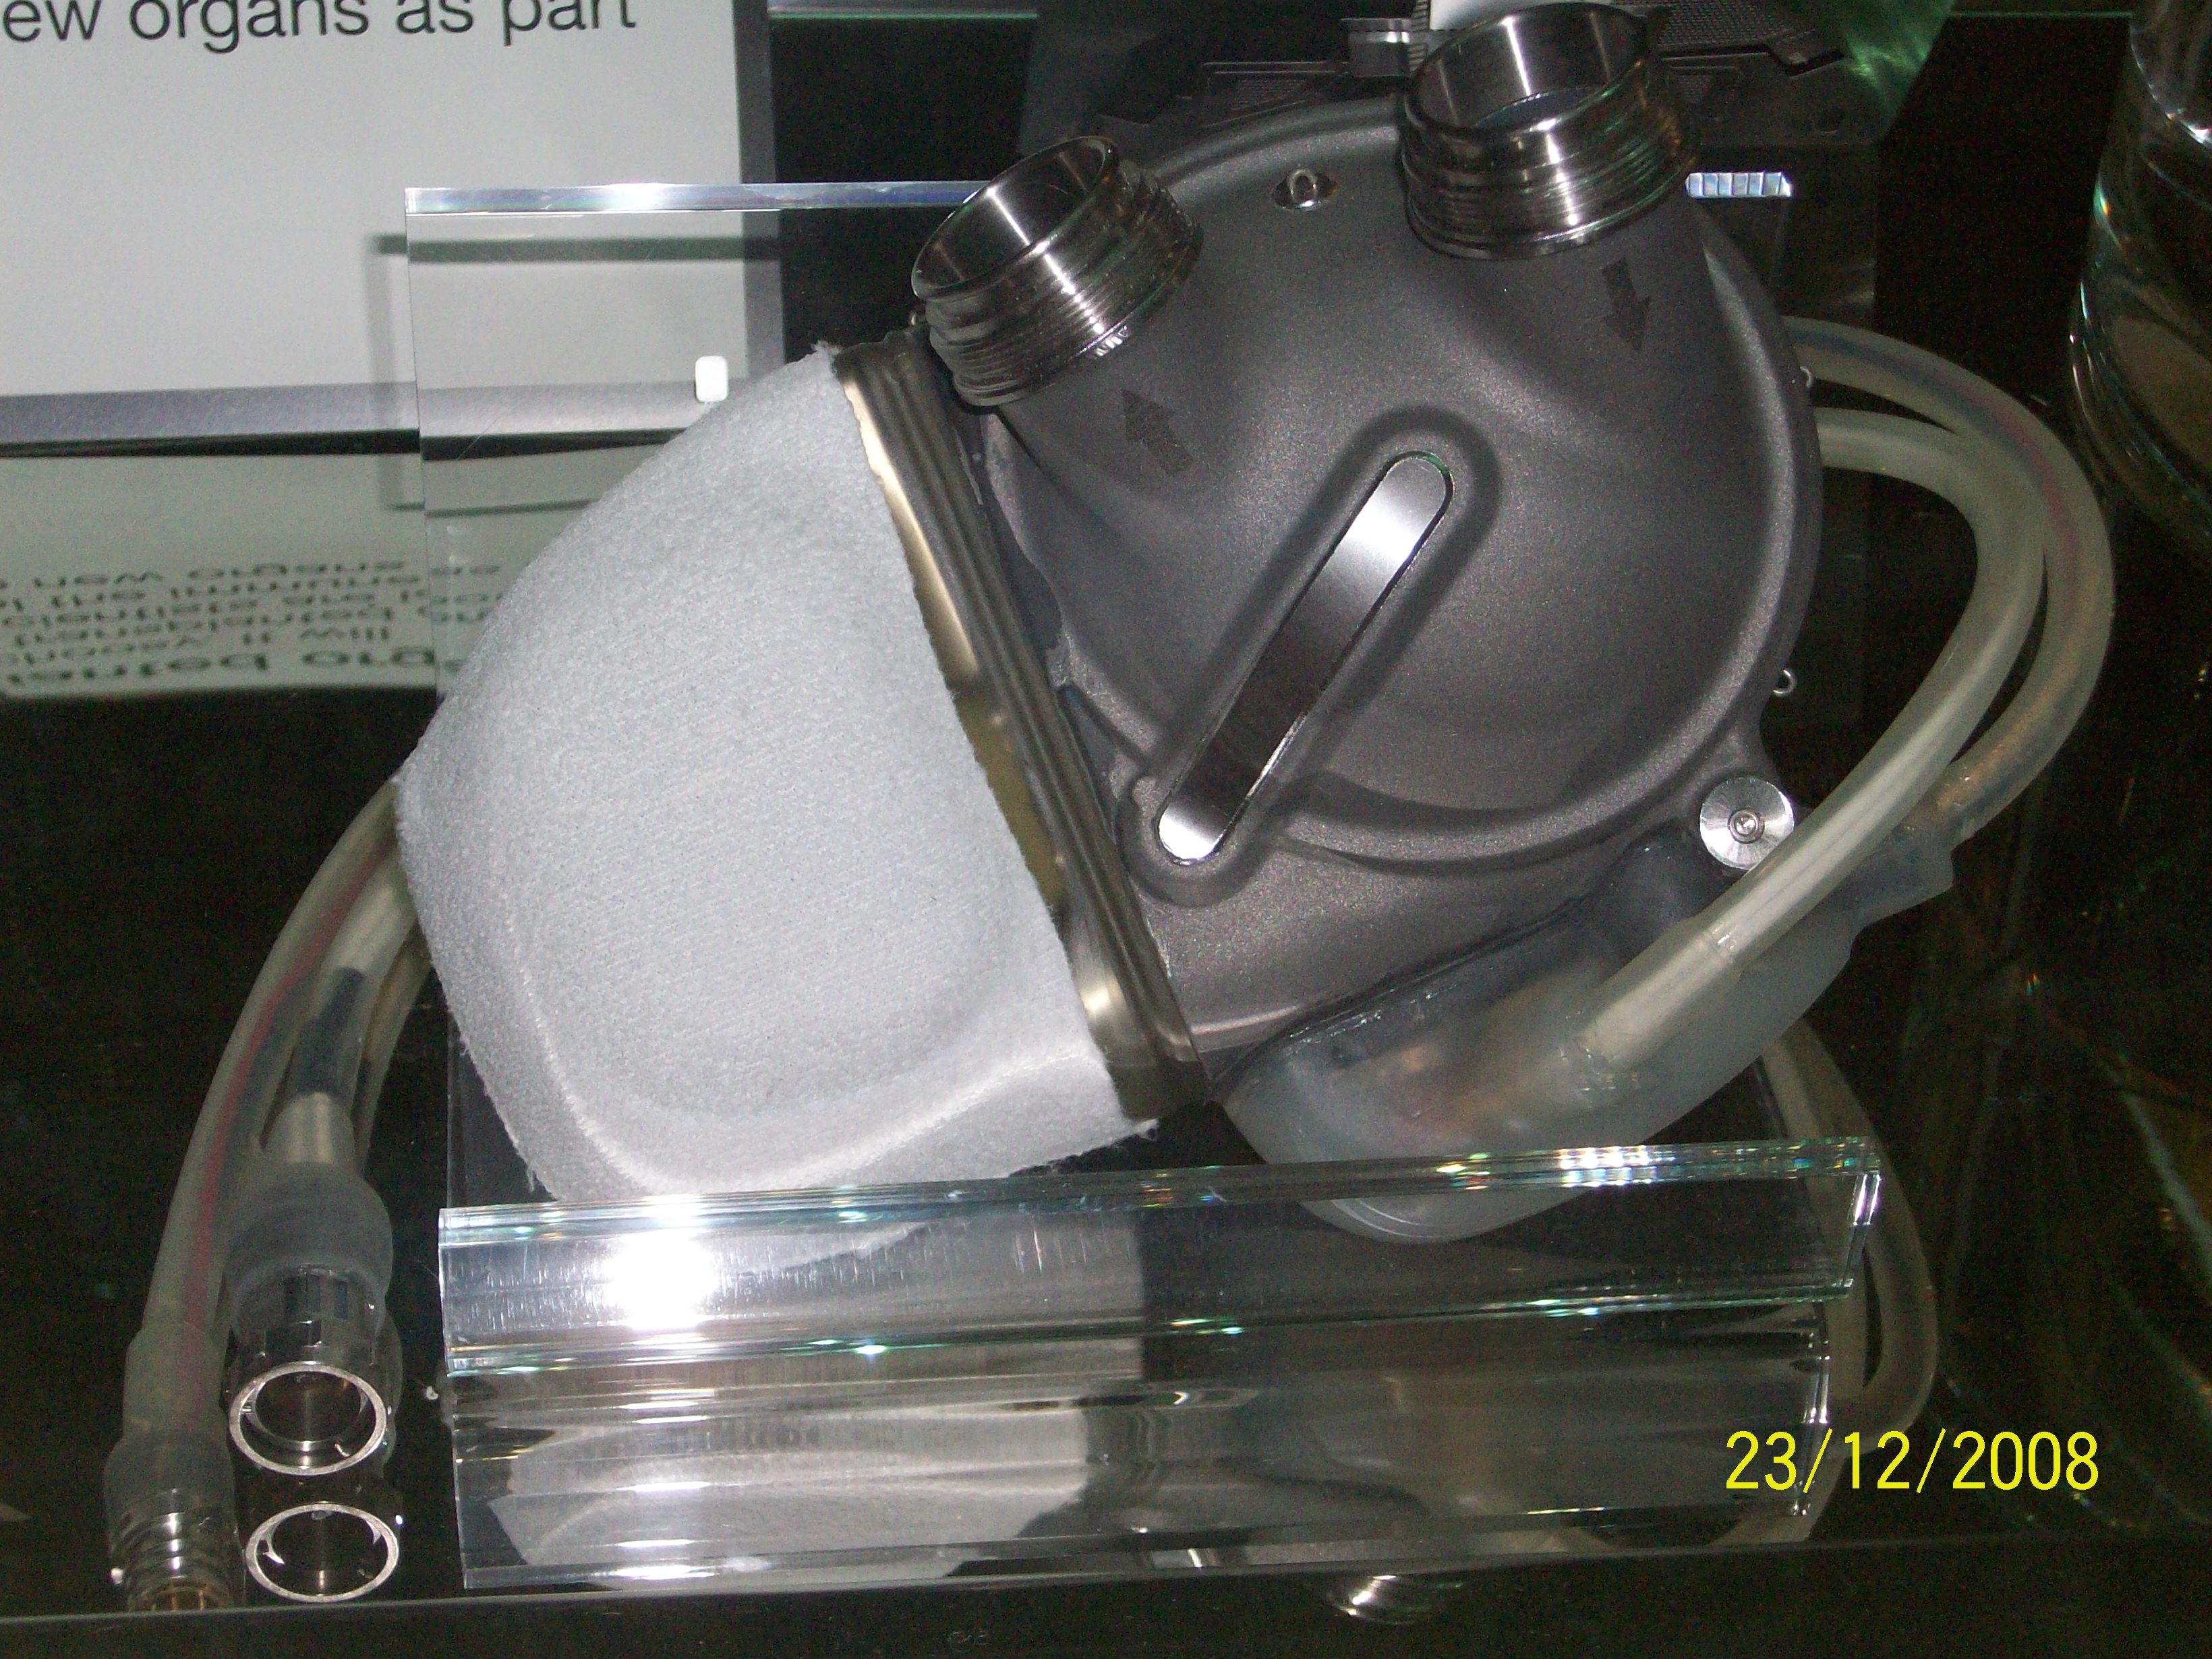 An artificial heart displayed at the London science museum]]